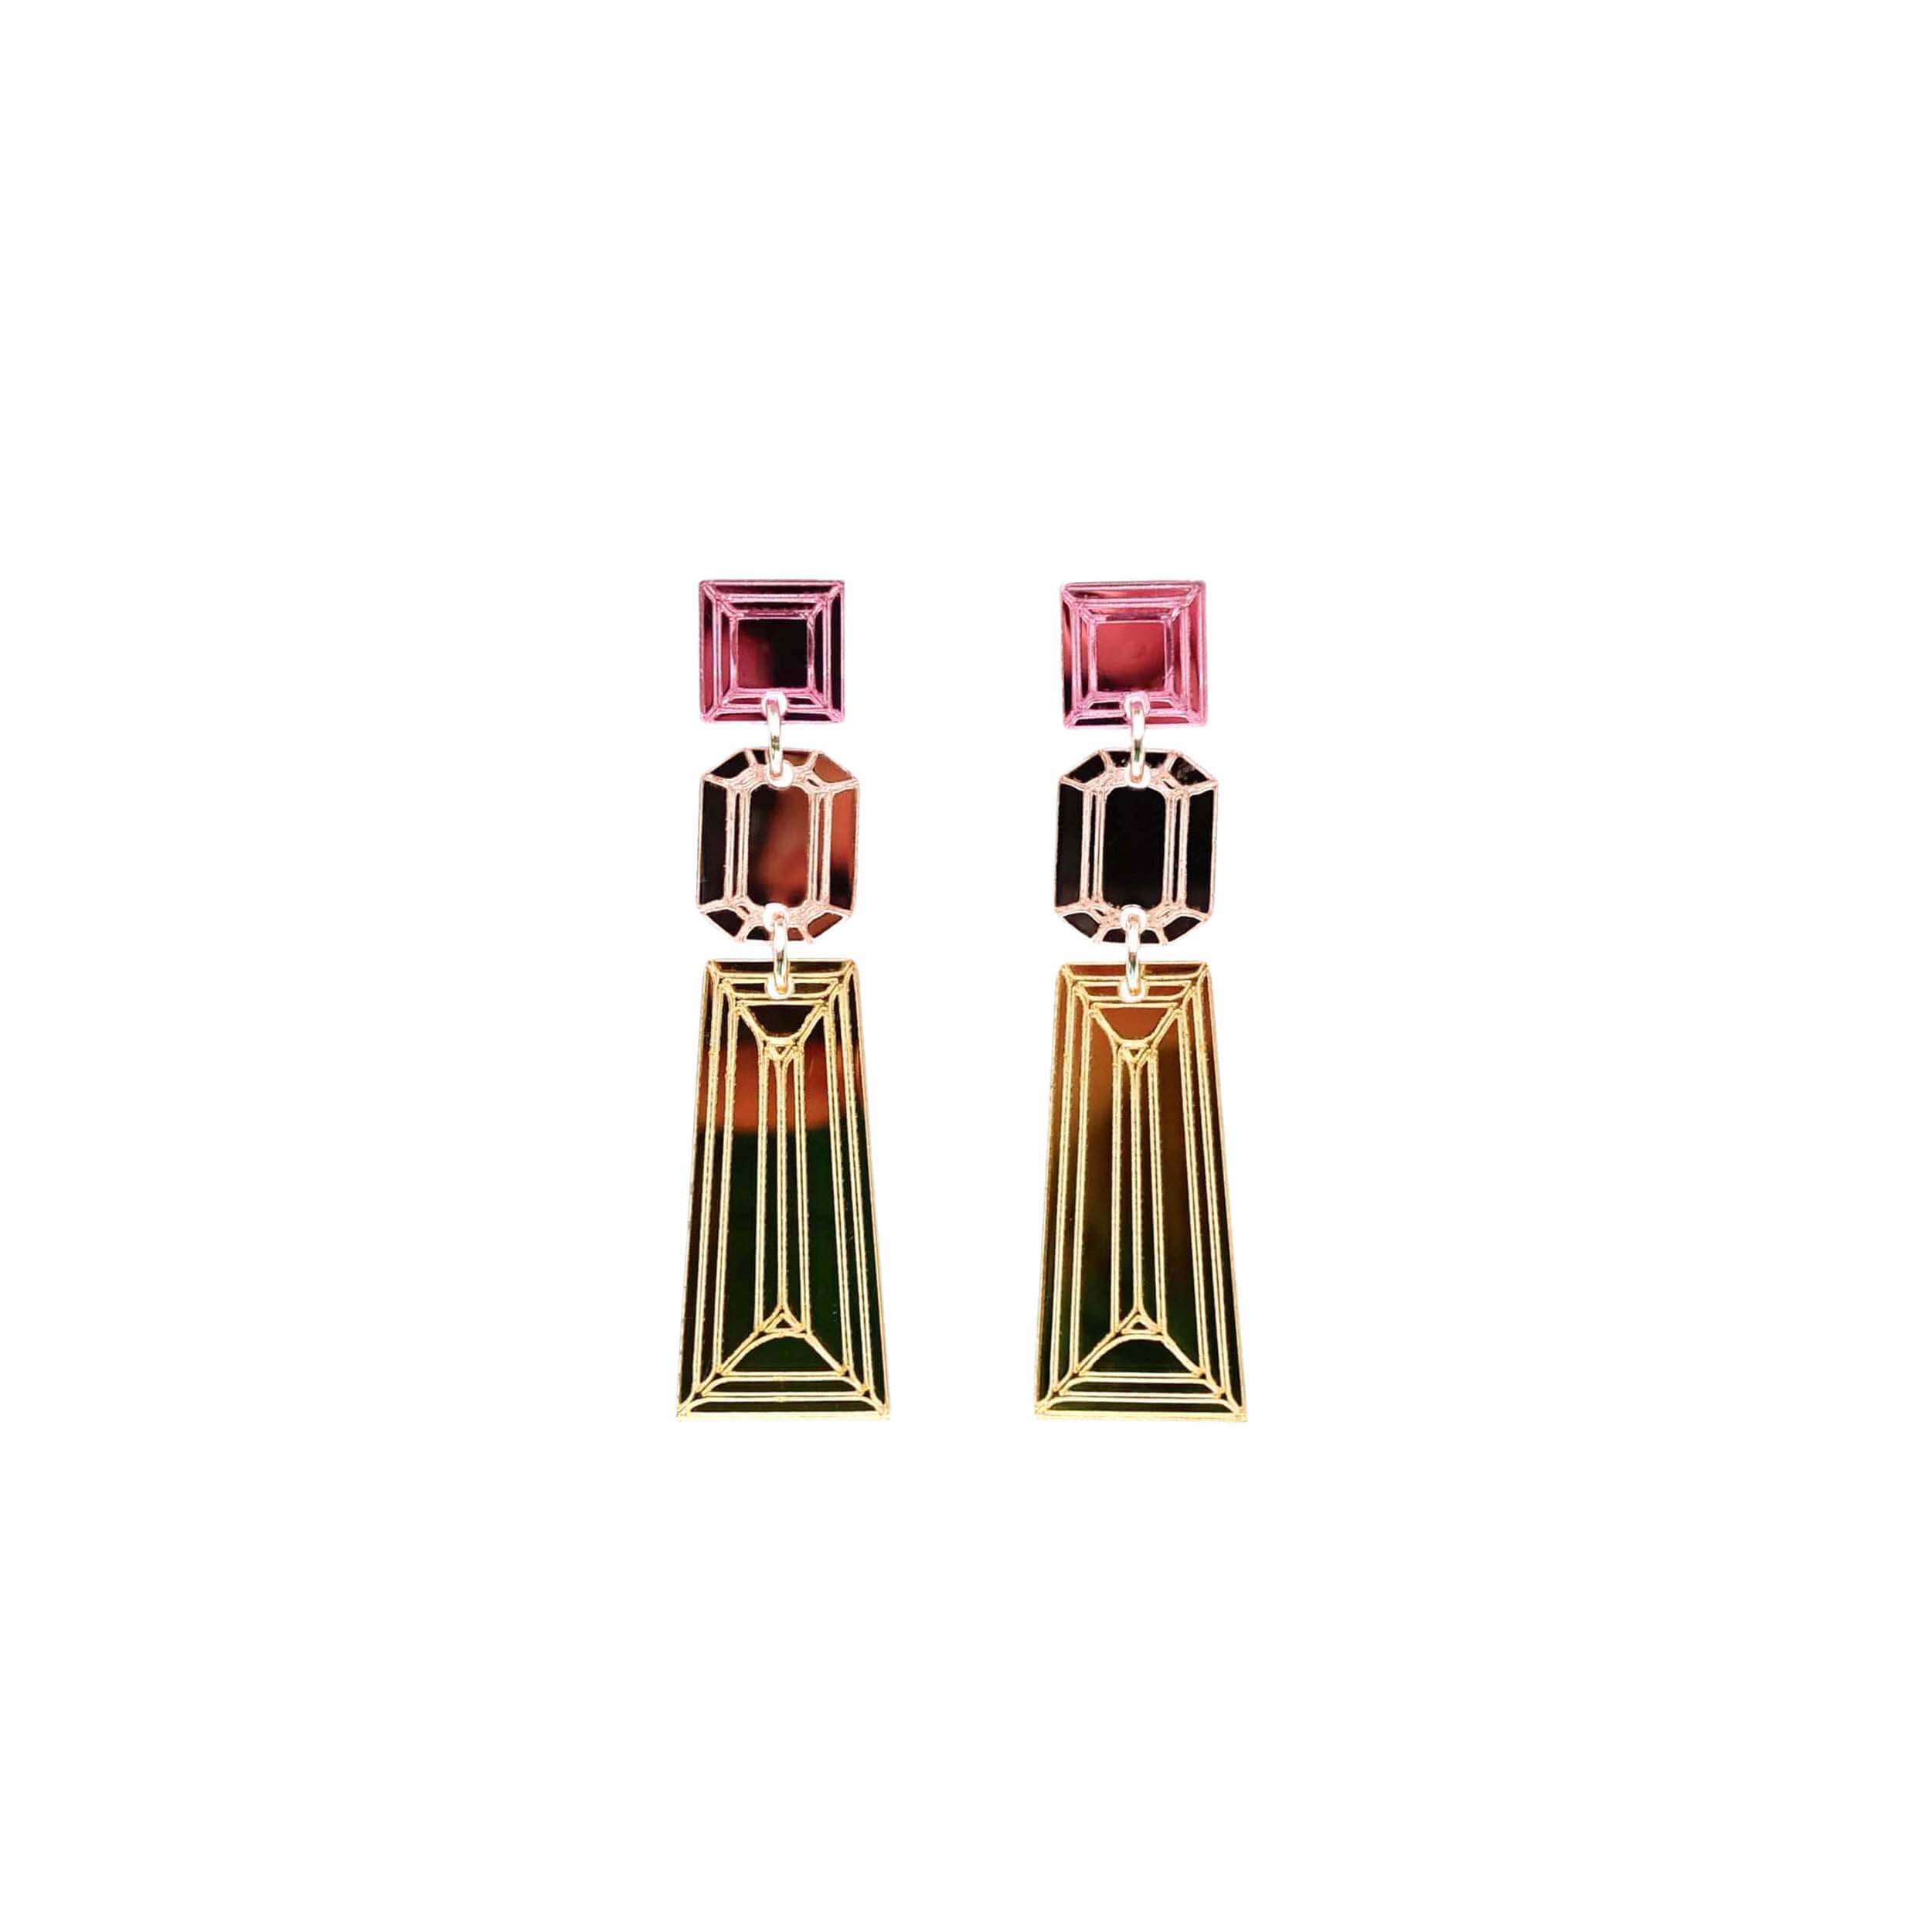 Long Deco drop earrings in gold, rose gold and pink mirror, shown hanging against a white background. 